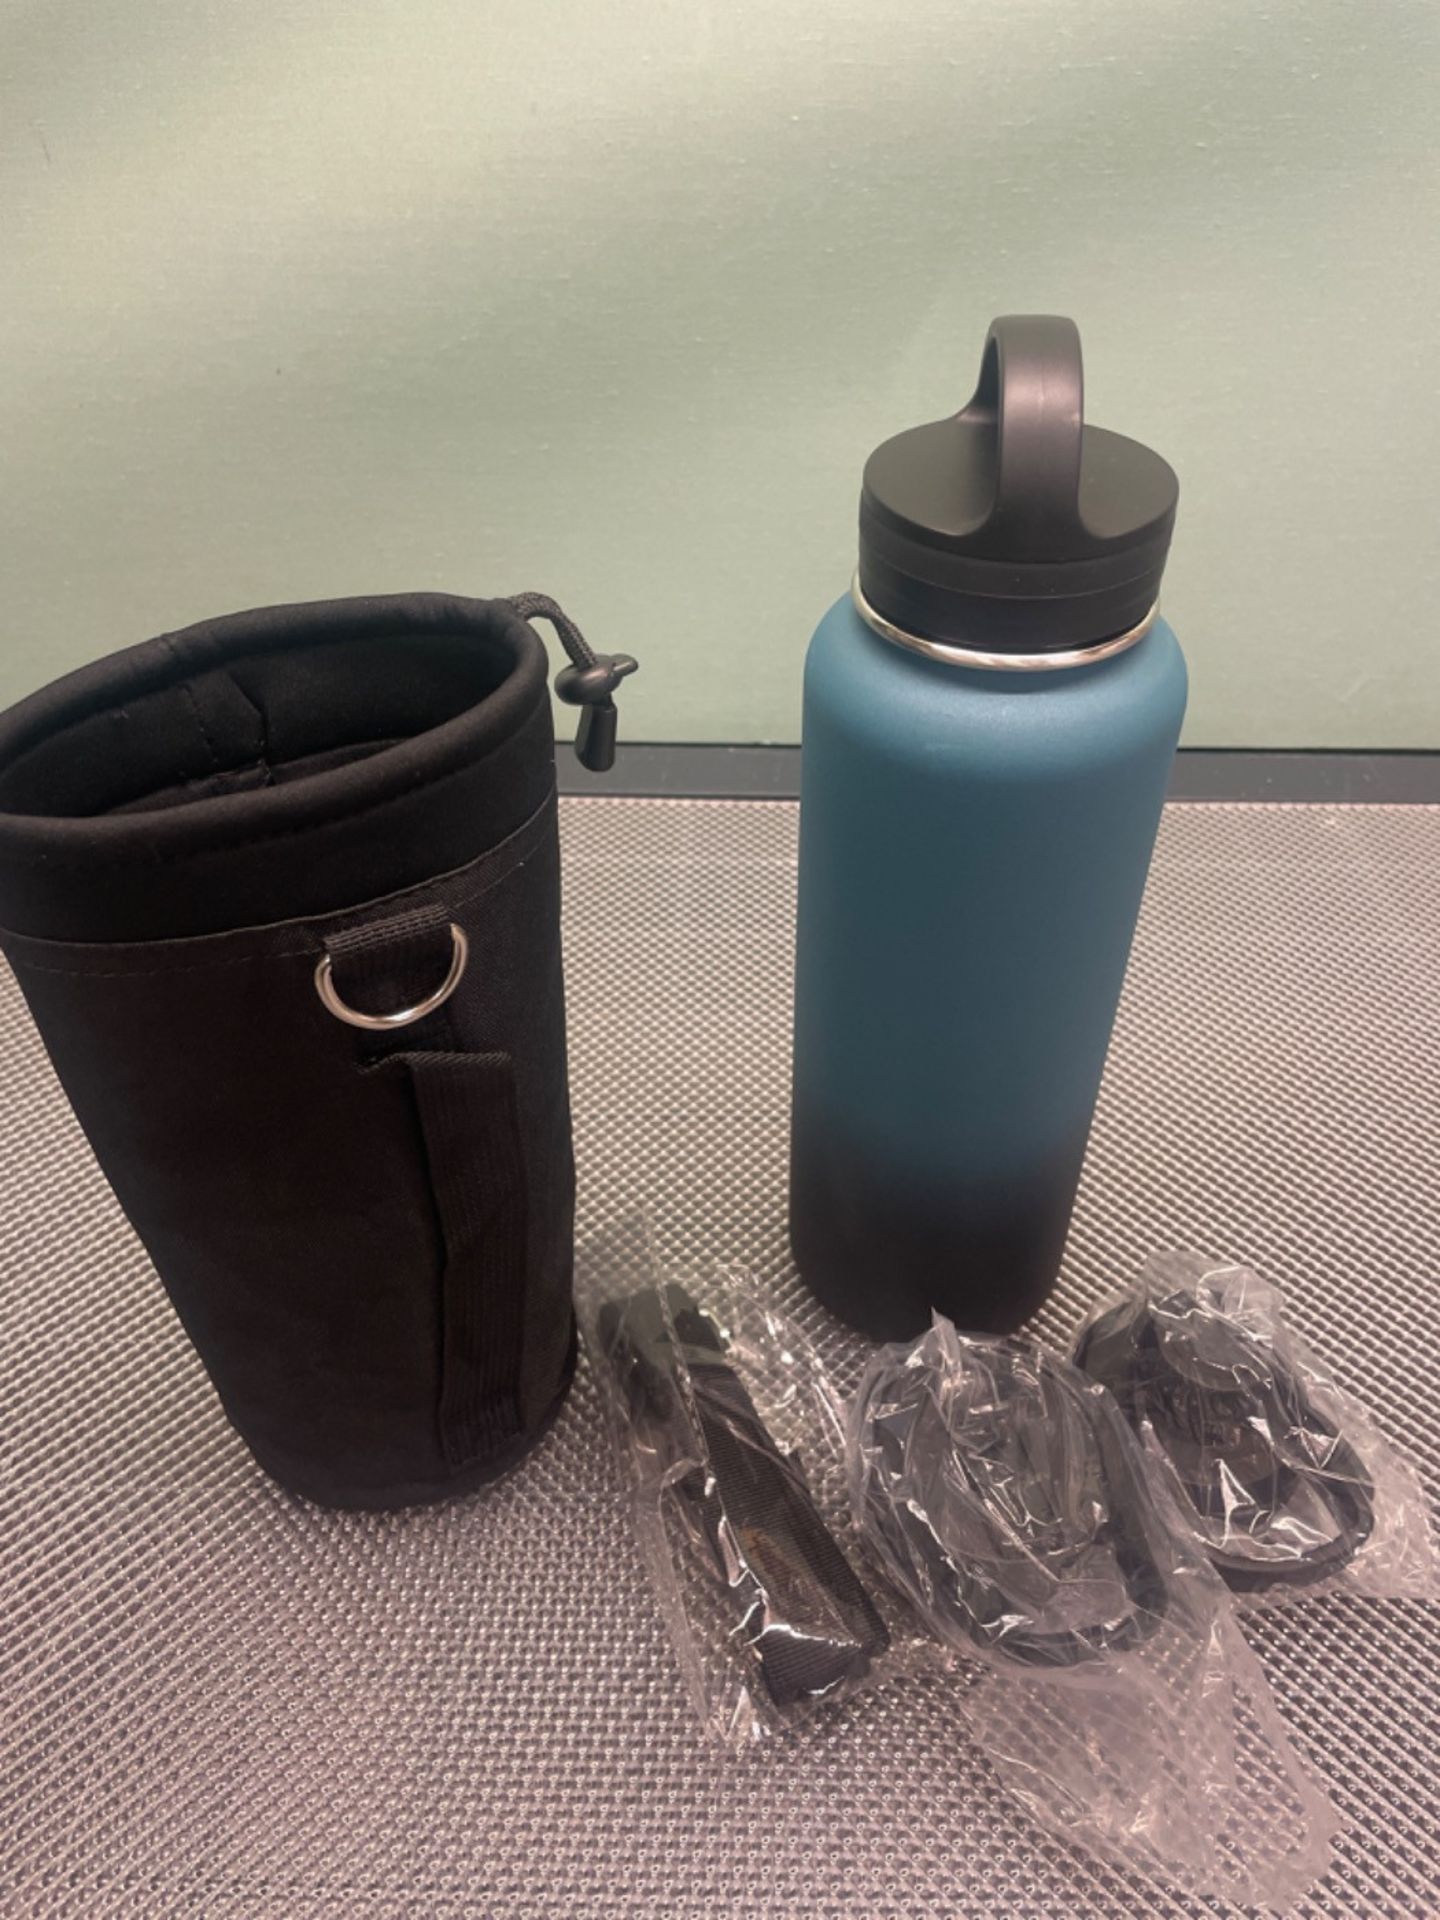 BUZIO 1180ml Stainless Steel Insulated Water Bottle, BUZIO Water Bottle with Straw Lids, Canteen Me - Image 2 of 3